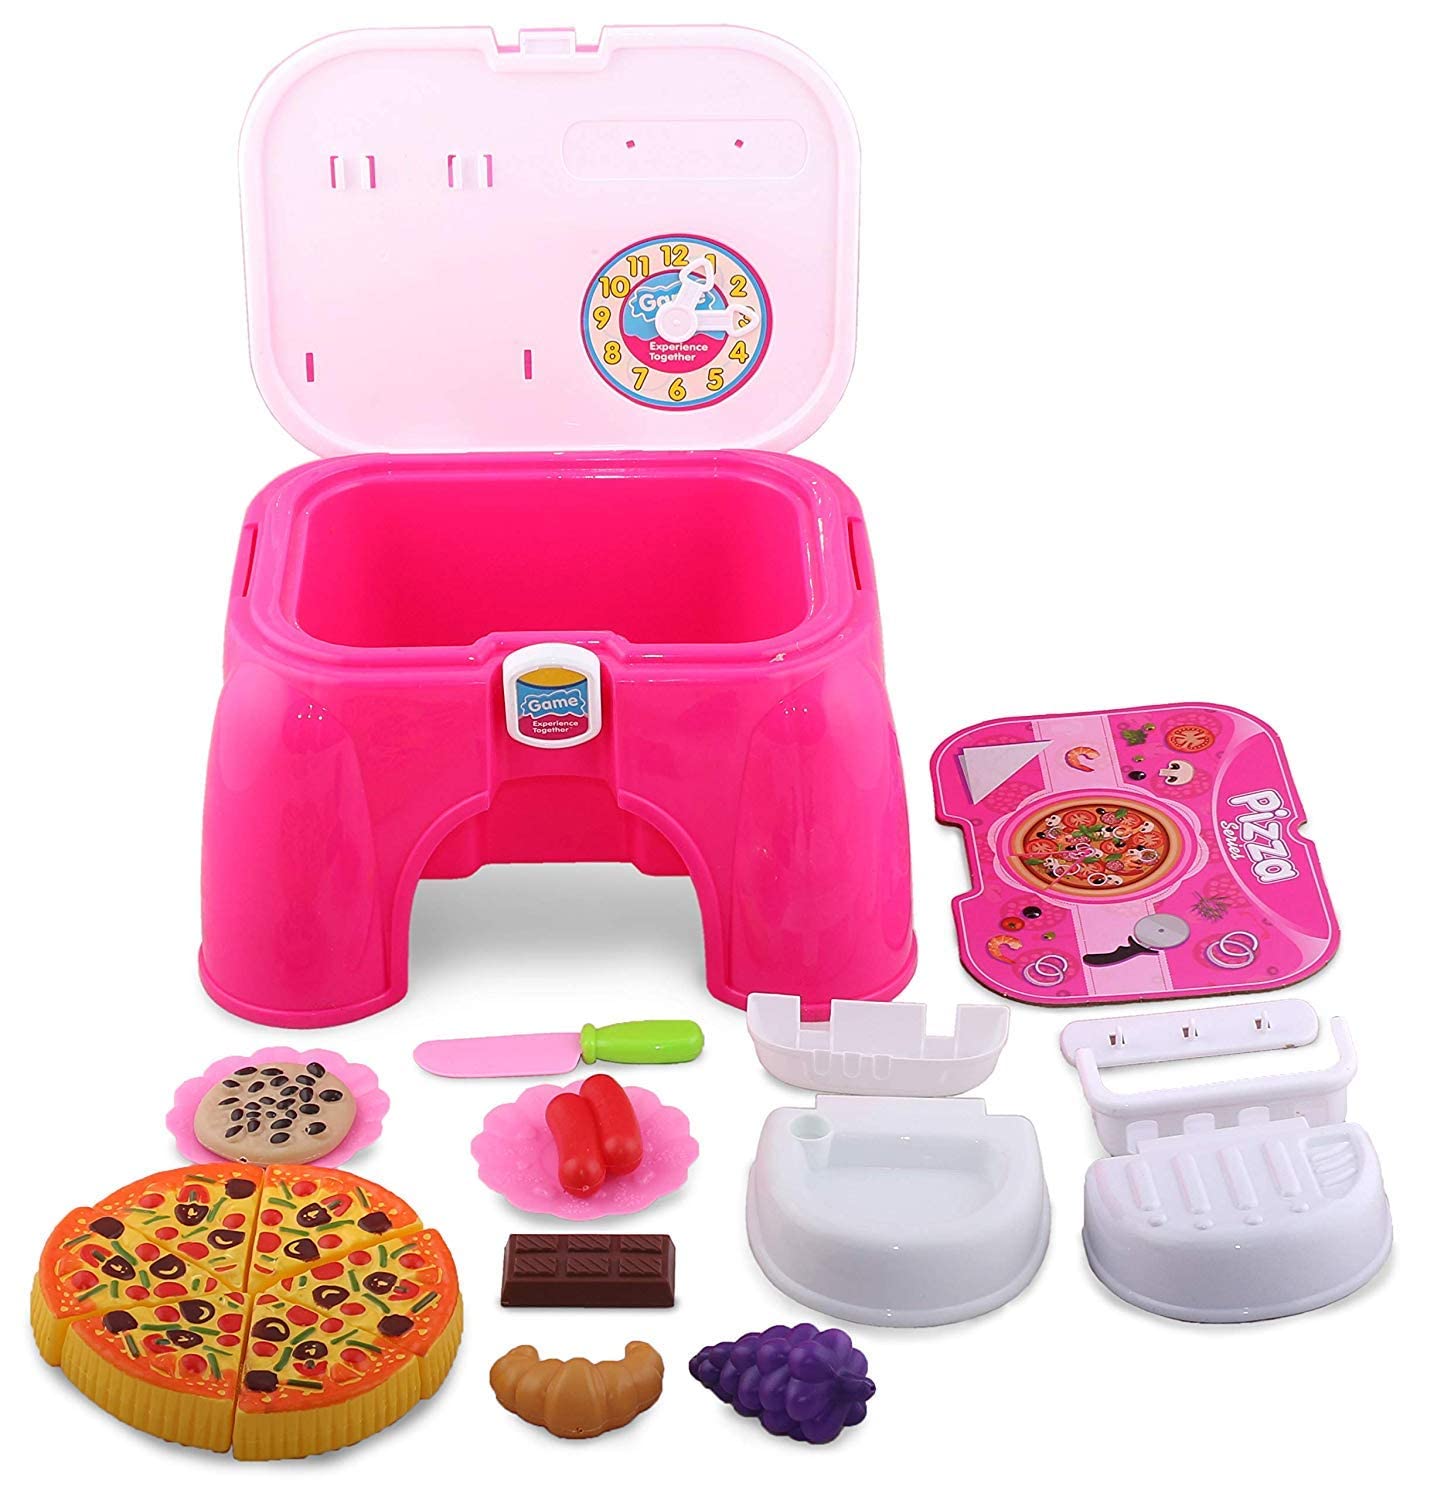 Kitchen Set, Pretend Play Kitchen Sets For Kids, Cooking Set, The Toy Chair Simulation Of Fruit